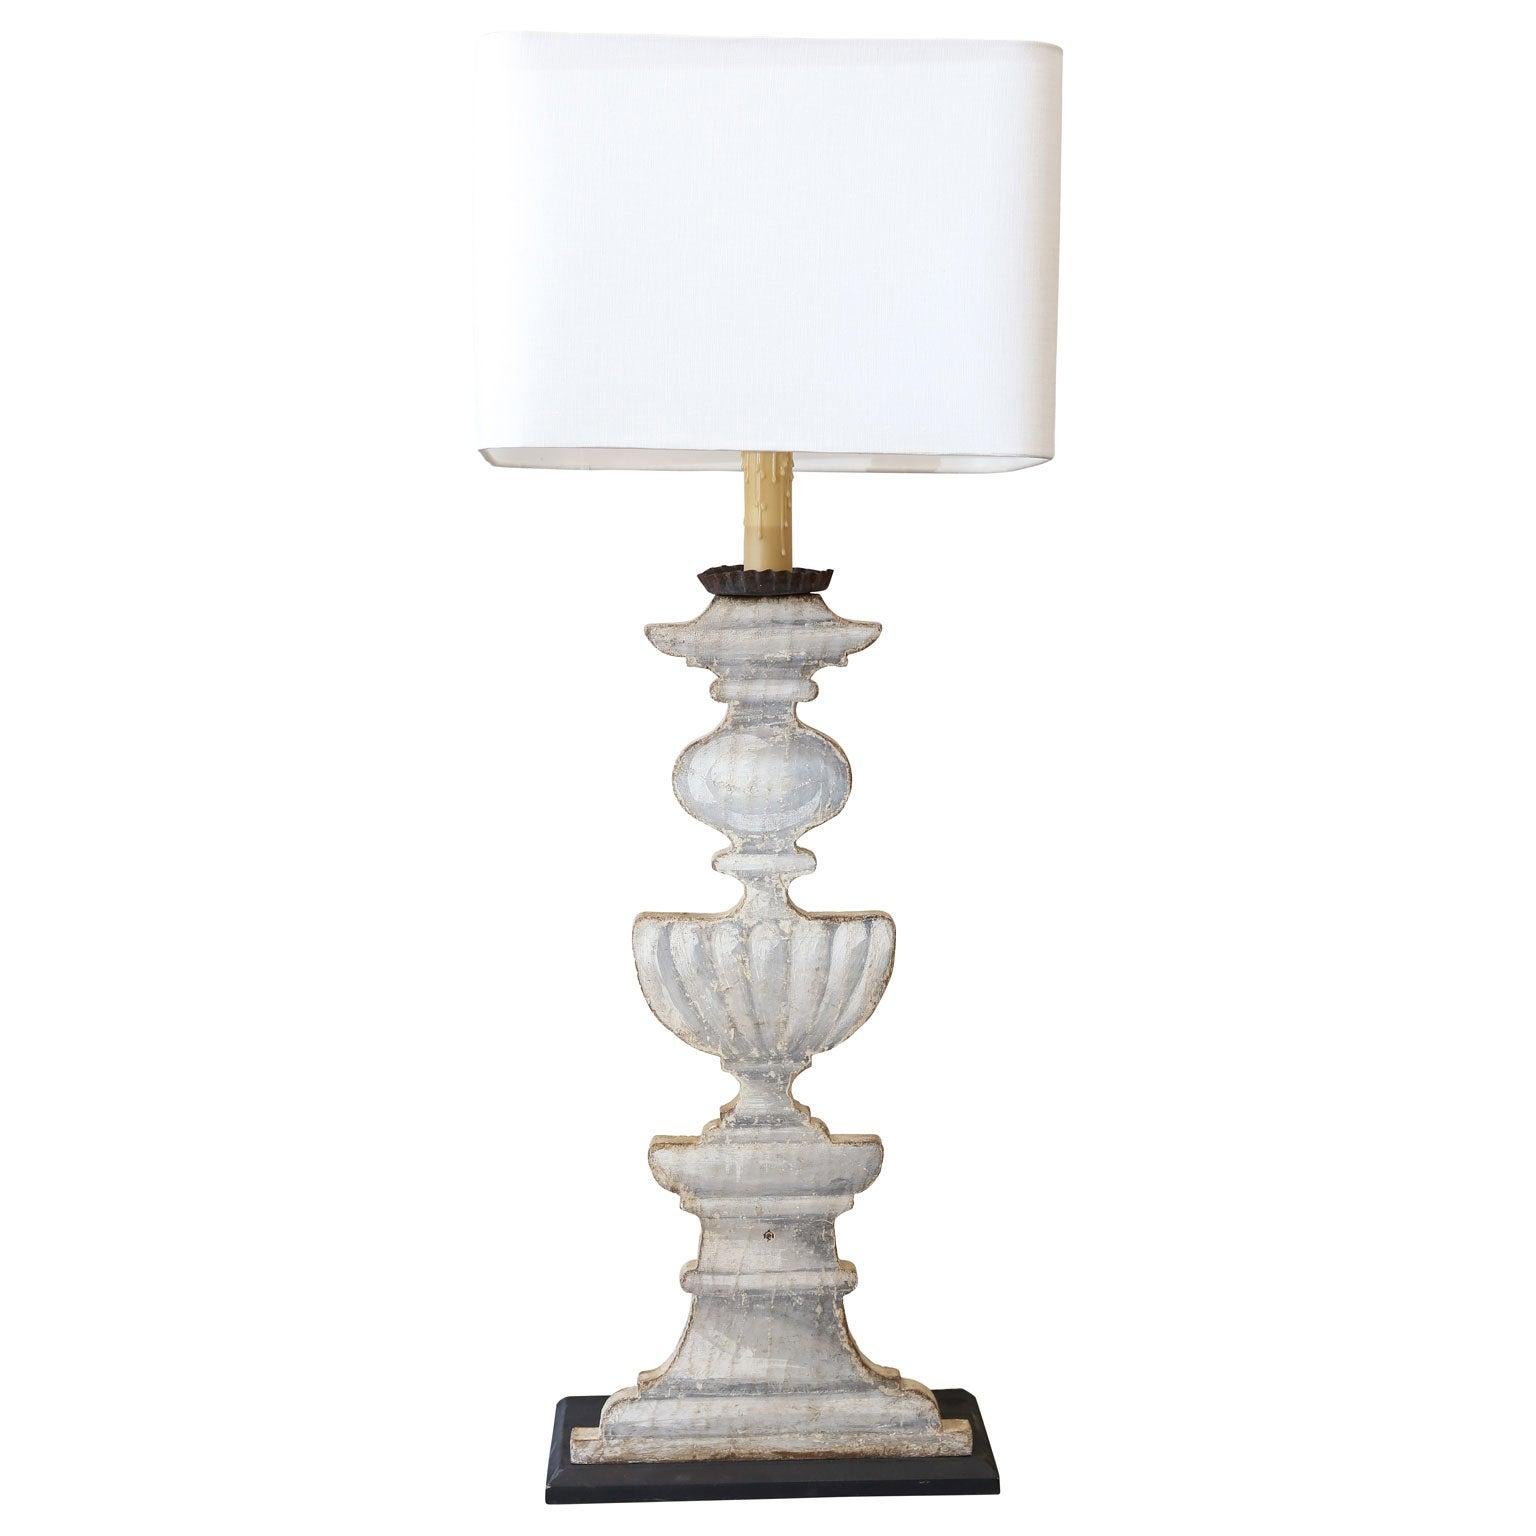 19th Century Trompe l'Oeil Candle Stand Lamp For Sale